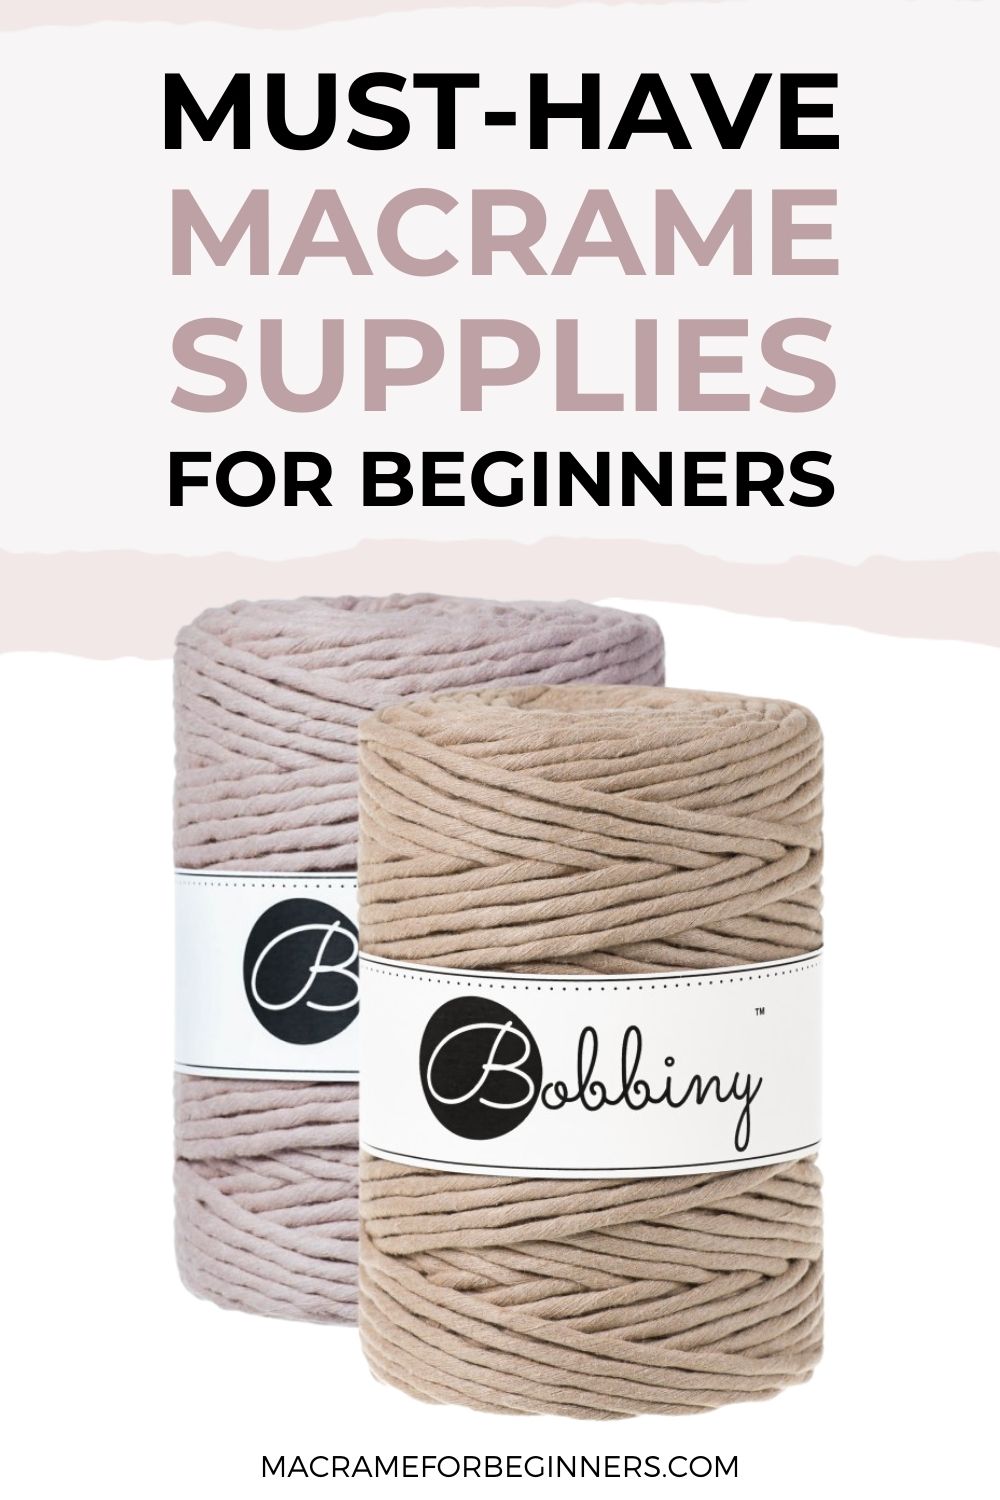 How to Start with Macrame in 2021 - A Complete Guide + Must-Have Macrame Supplies for Beginners 2